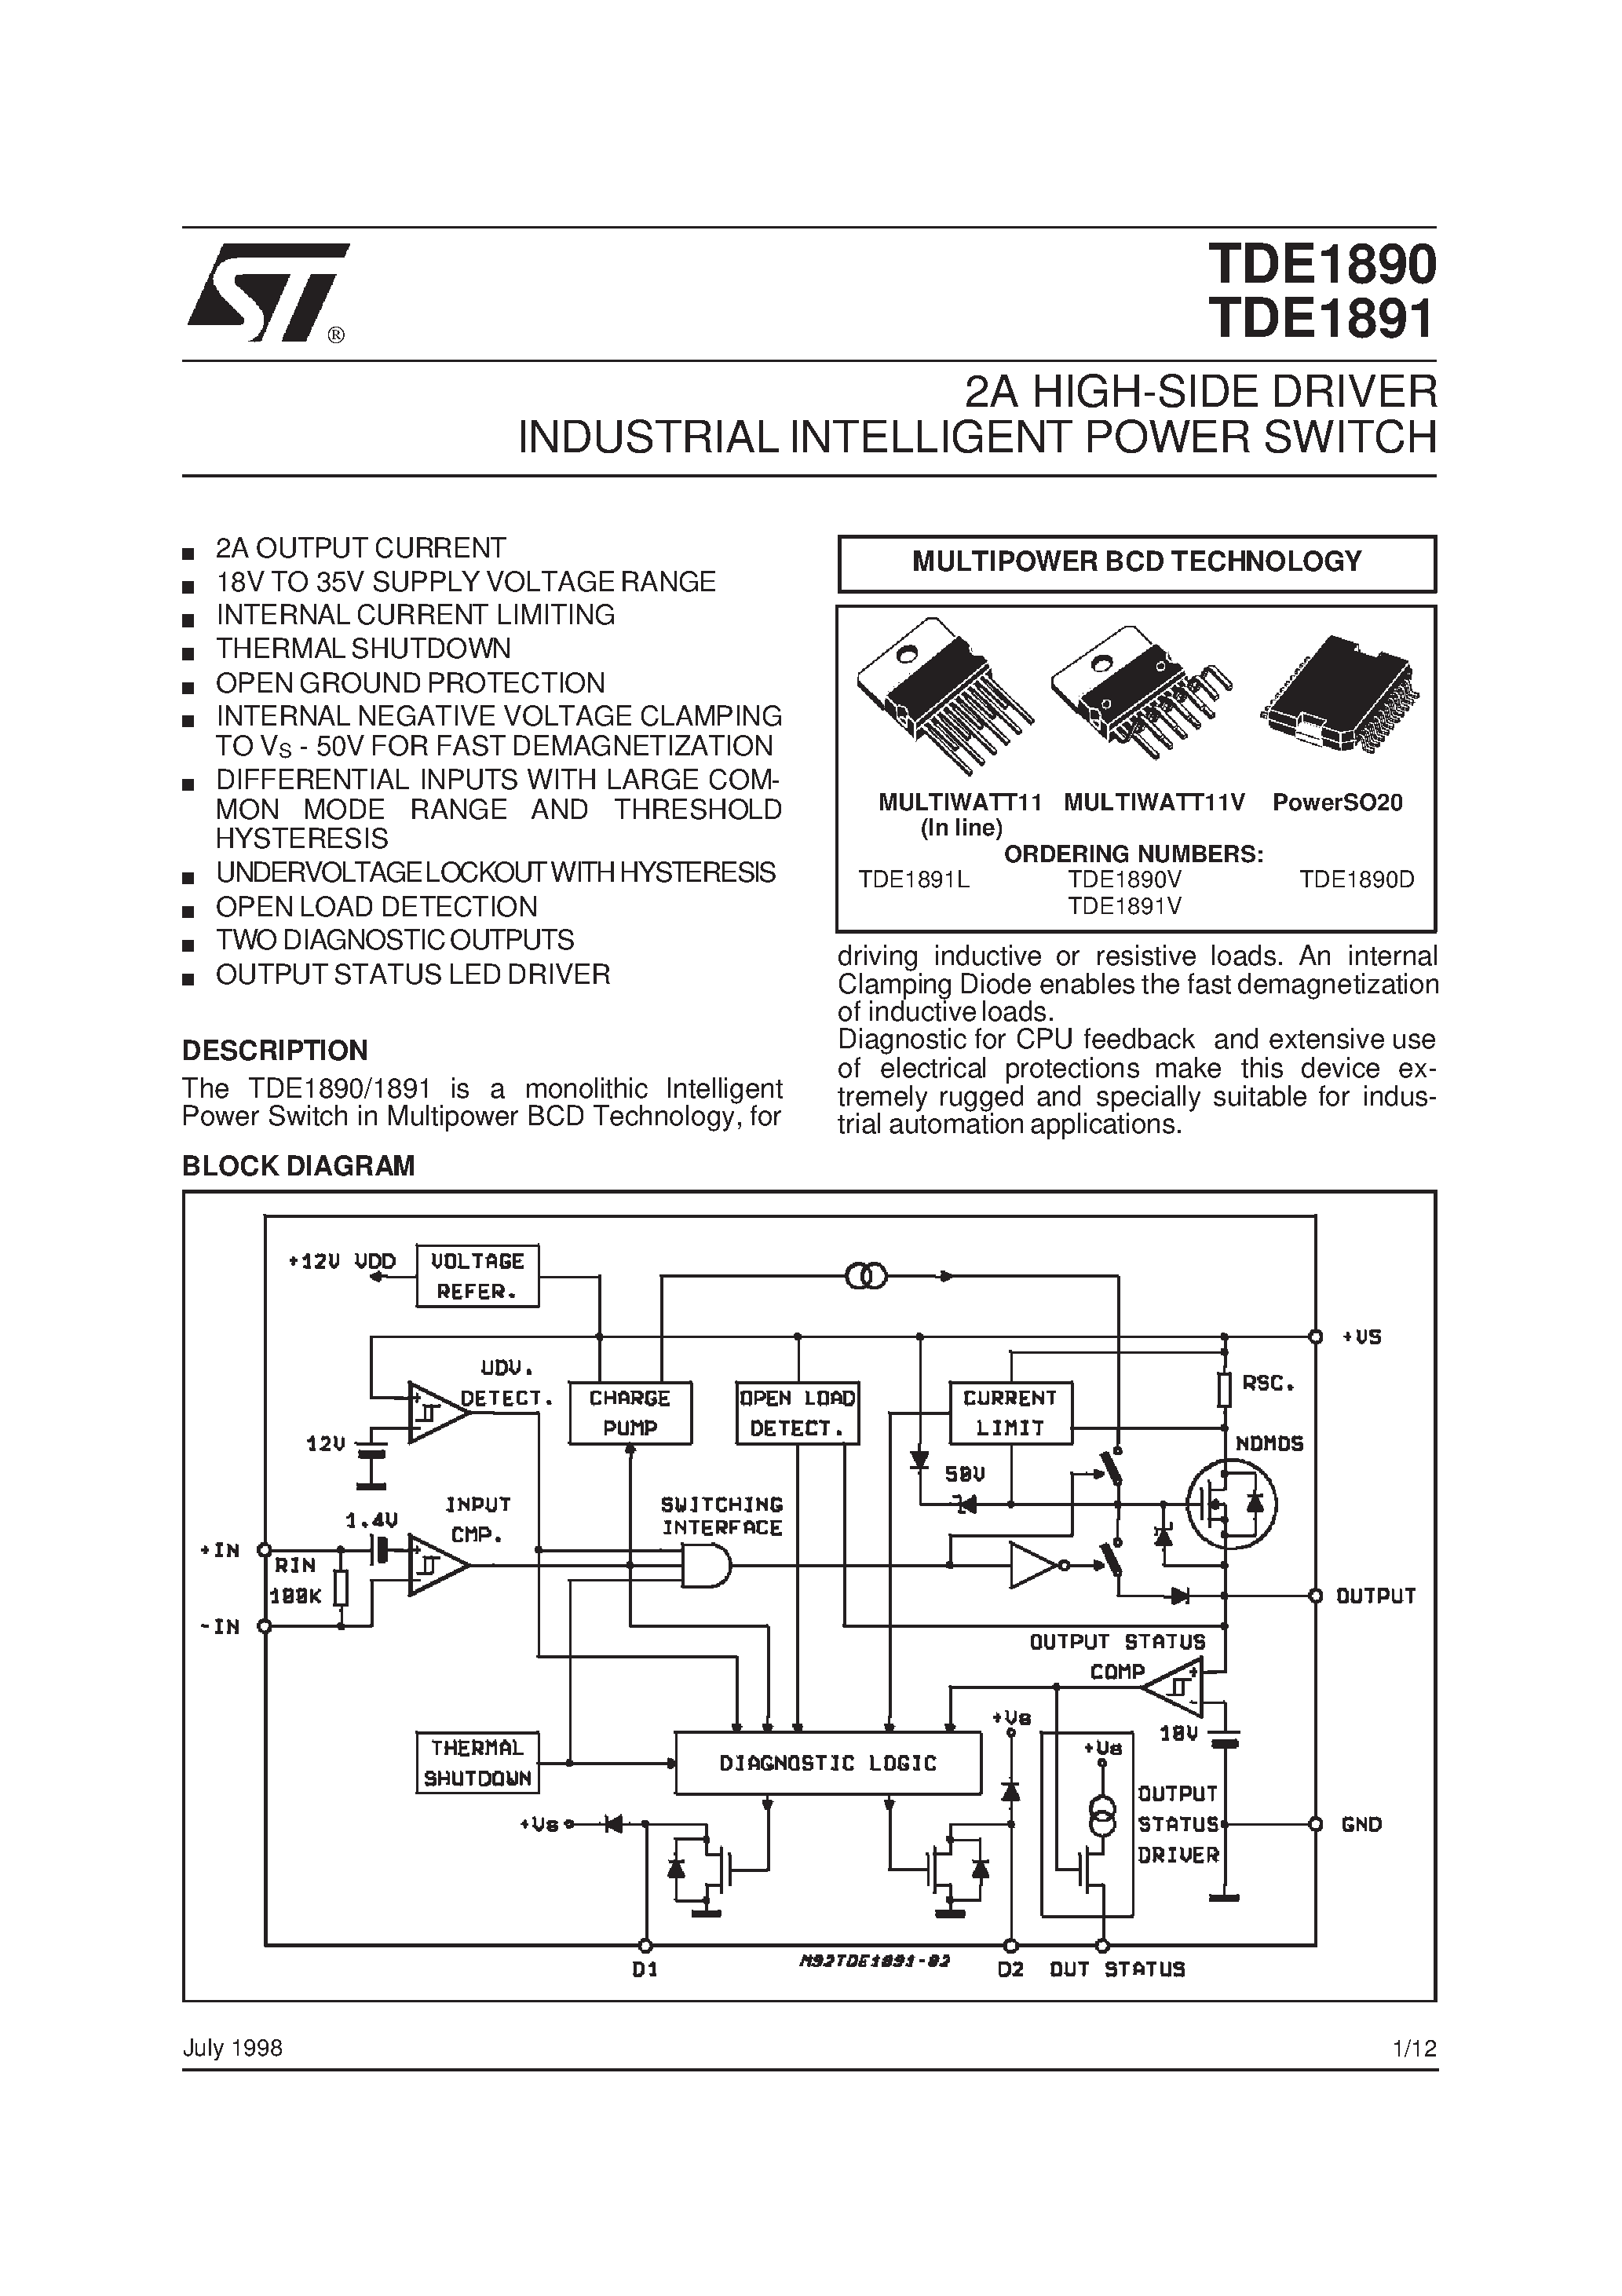 Datasheet TDE1891V - 2A HIGH-SIDE DRIVER INDUSTRIAL INTELLIGENT POWER SWITCH page 1